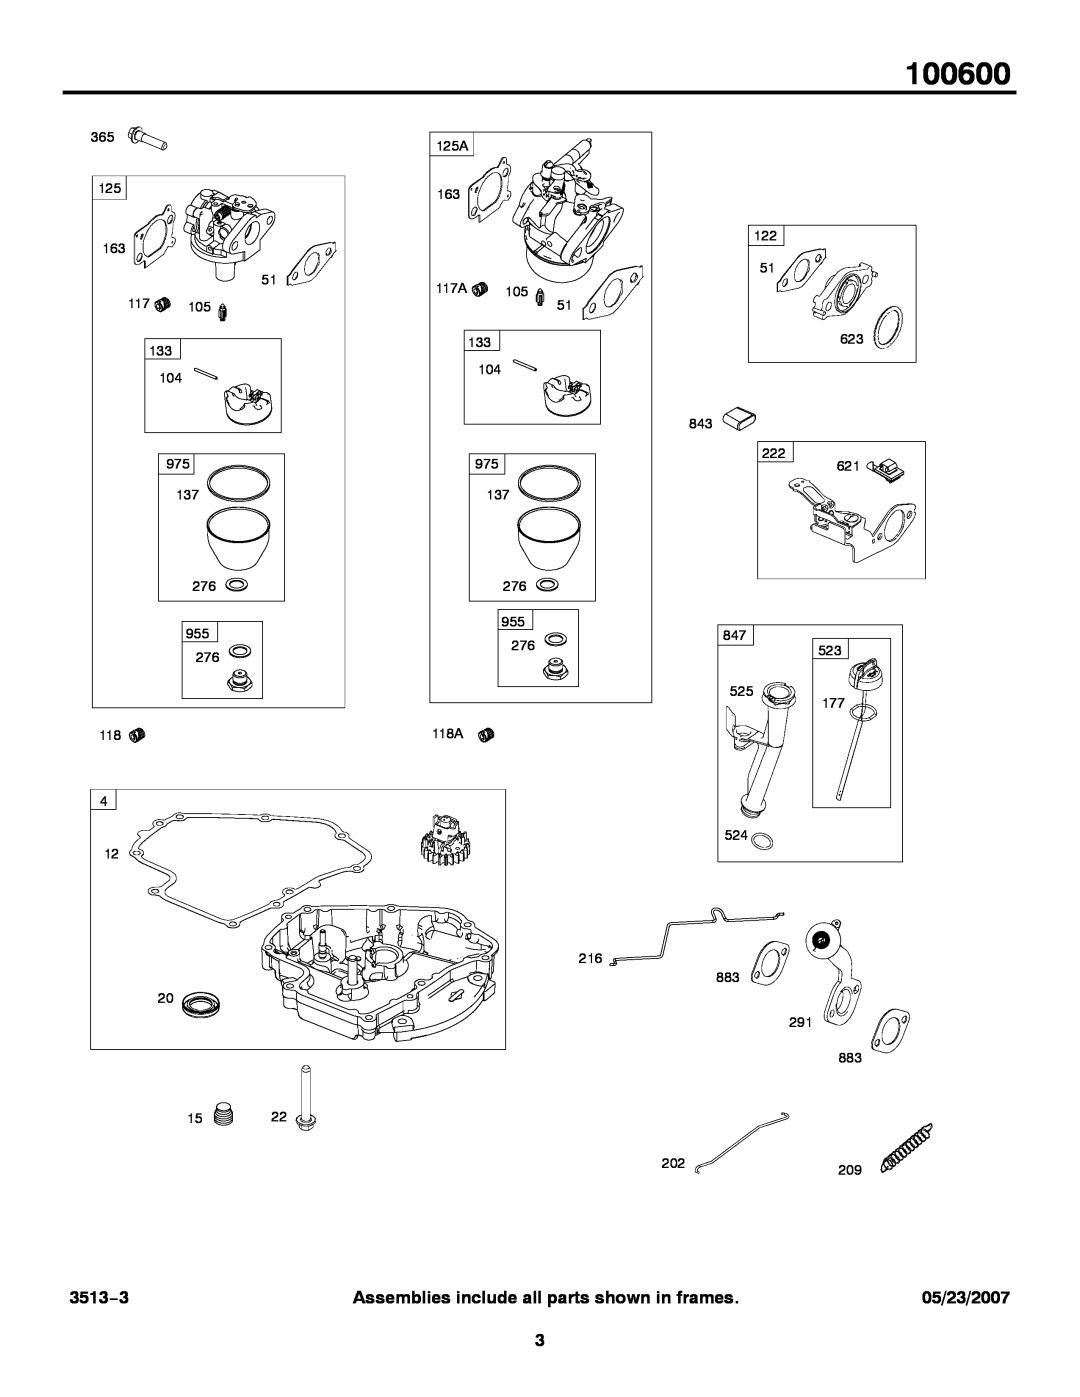 Briggs & Stratton 100600 service manual 3513−3, Assemblies include all parts shown in frames, 05/23/2007 